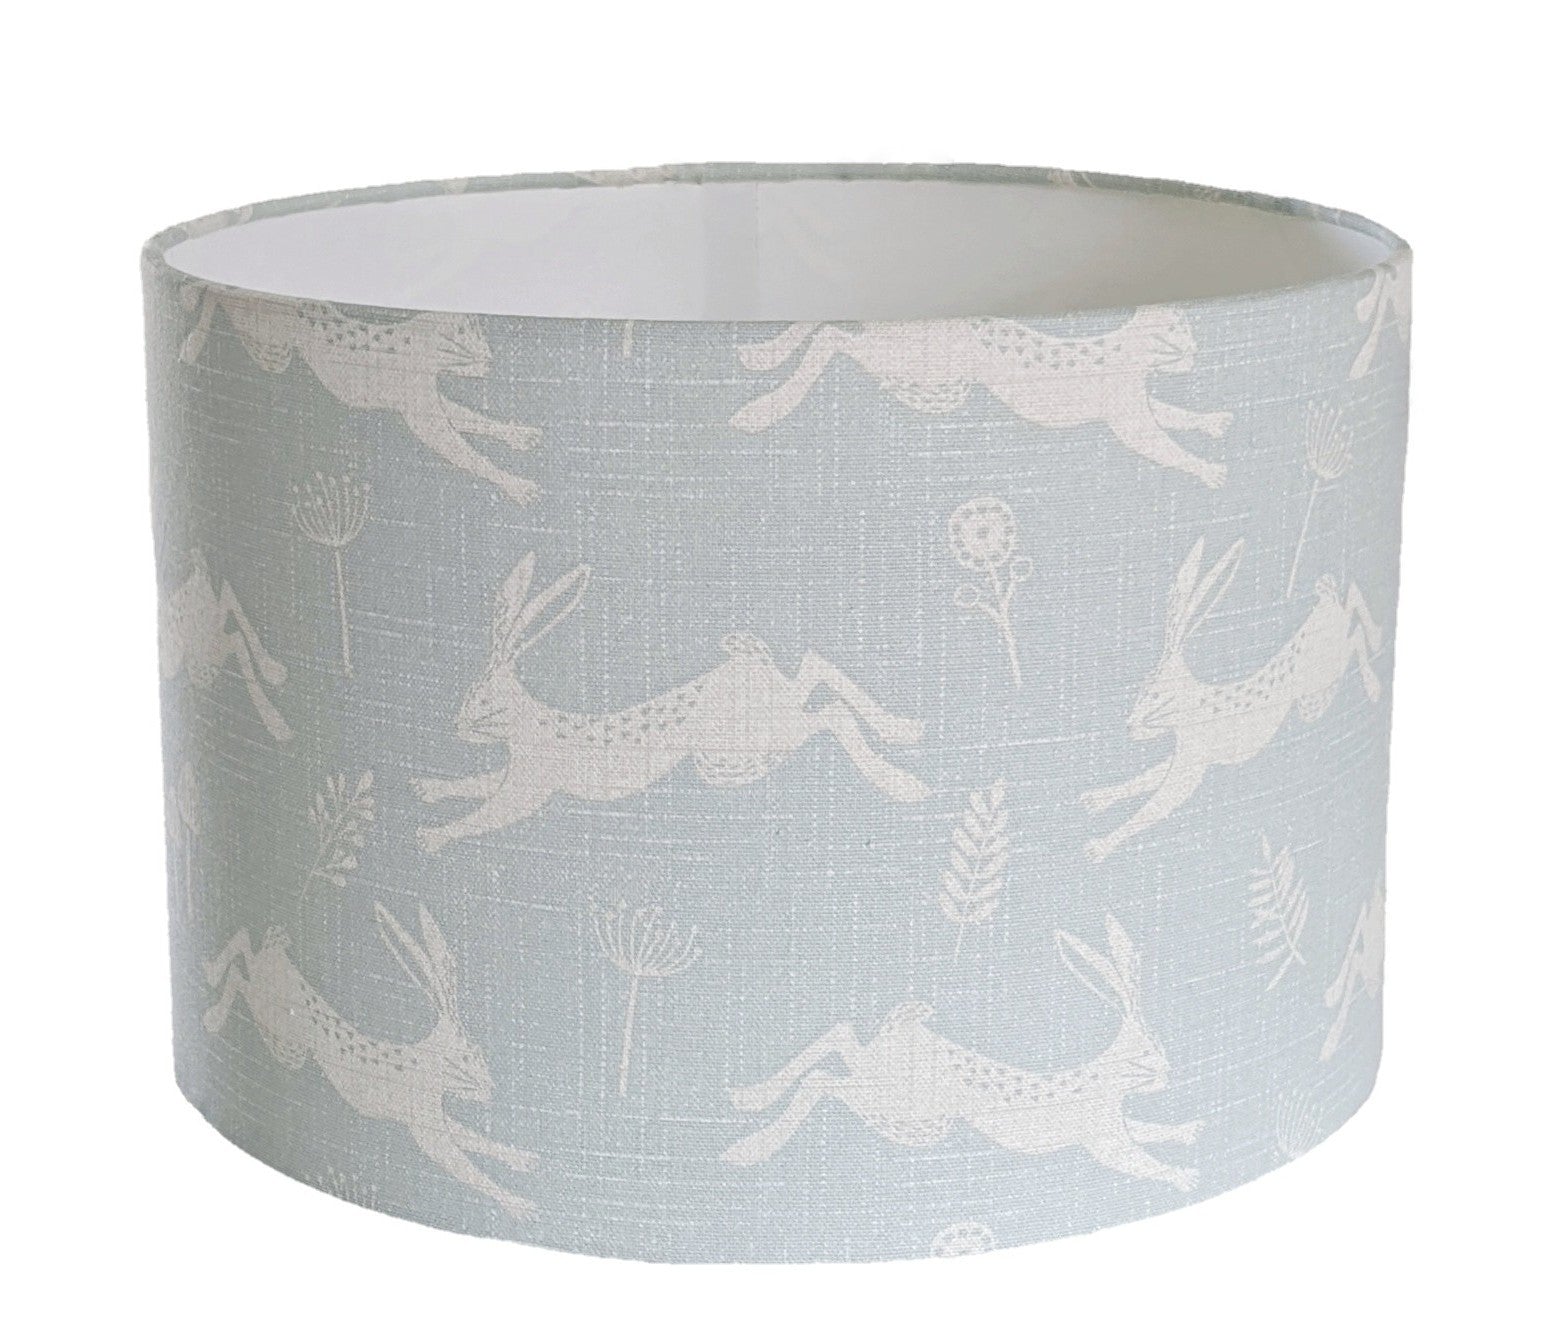 Leaping Hare lampshade for a ceiling pendant -  20cm, 30cm and 40cm